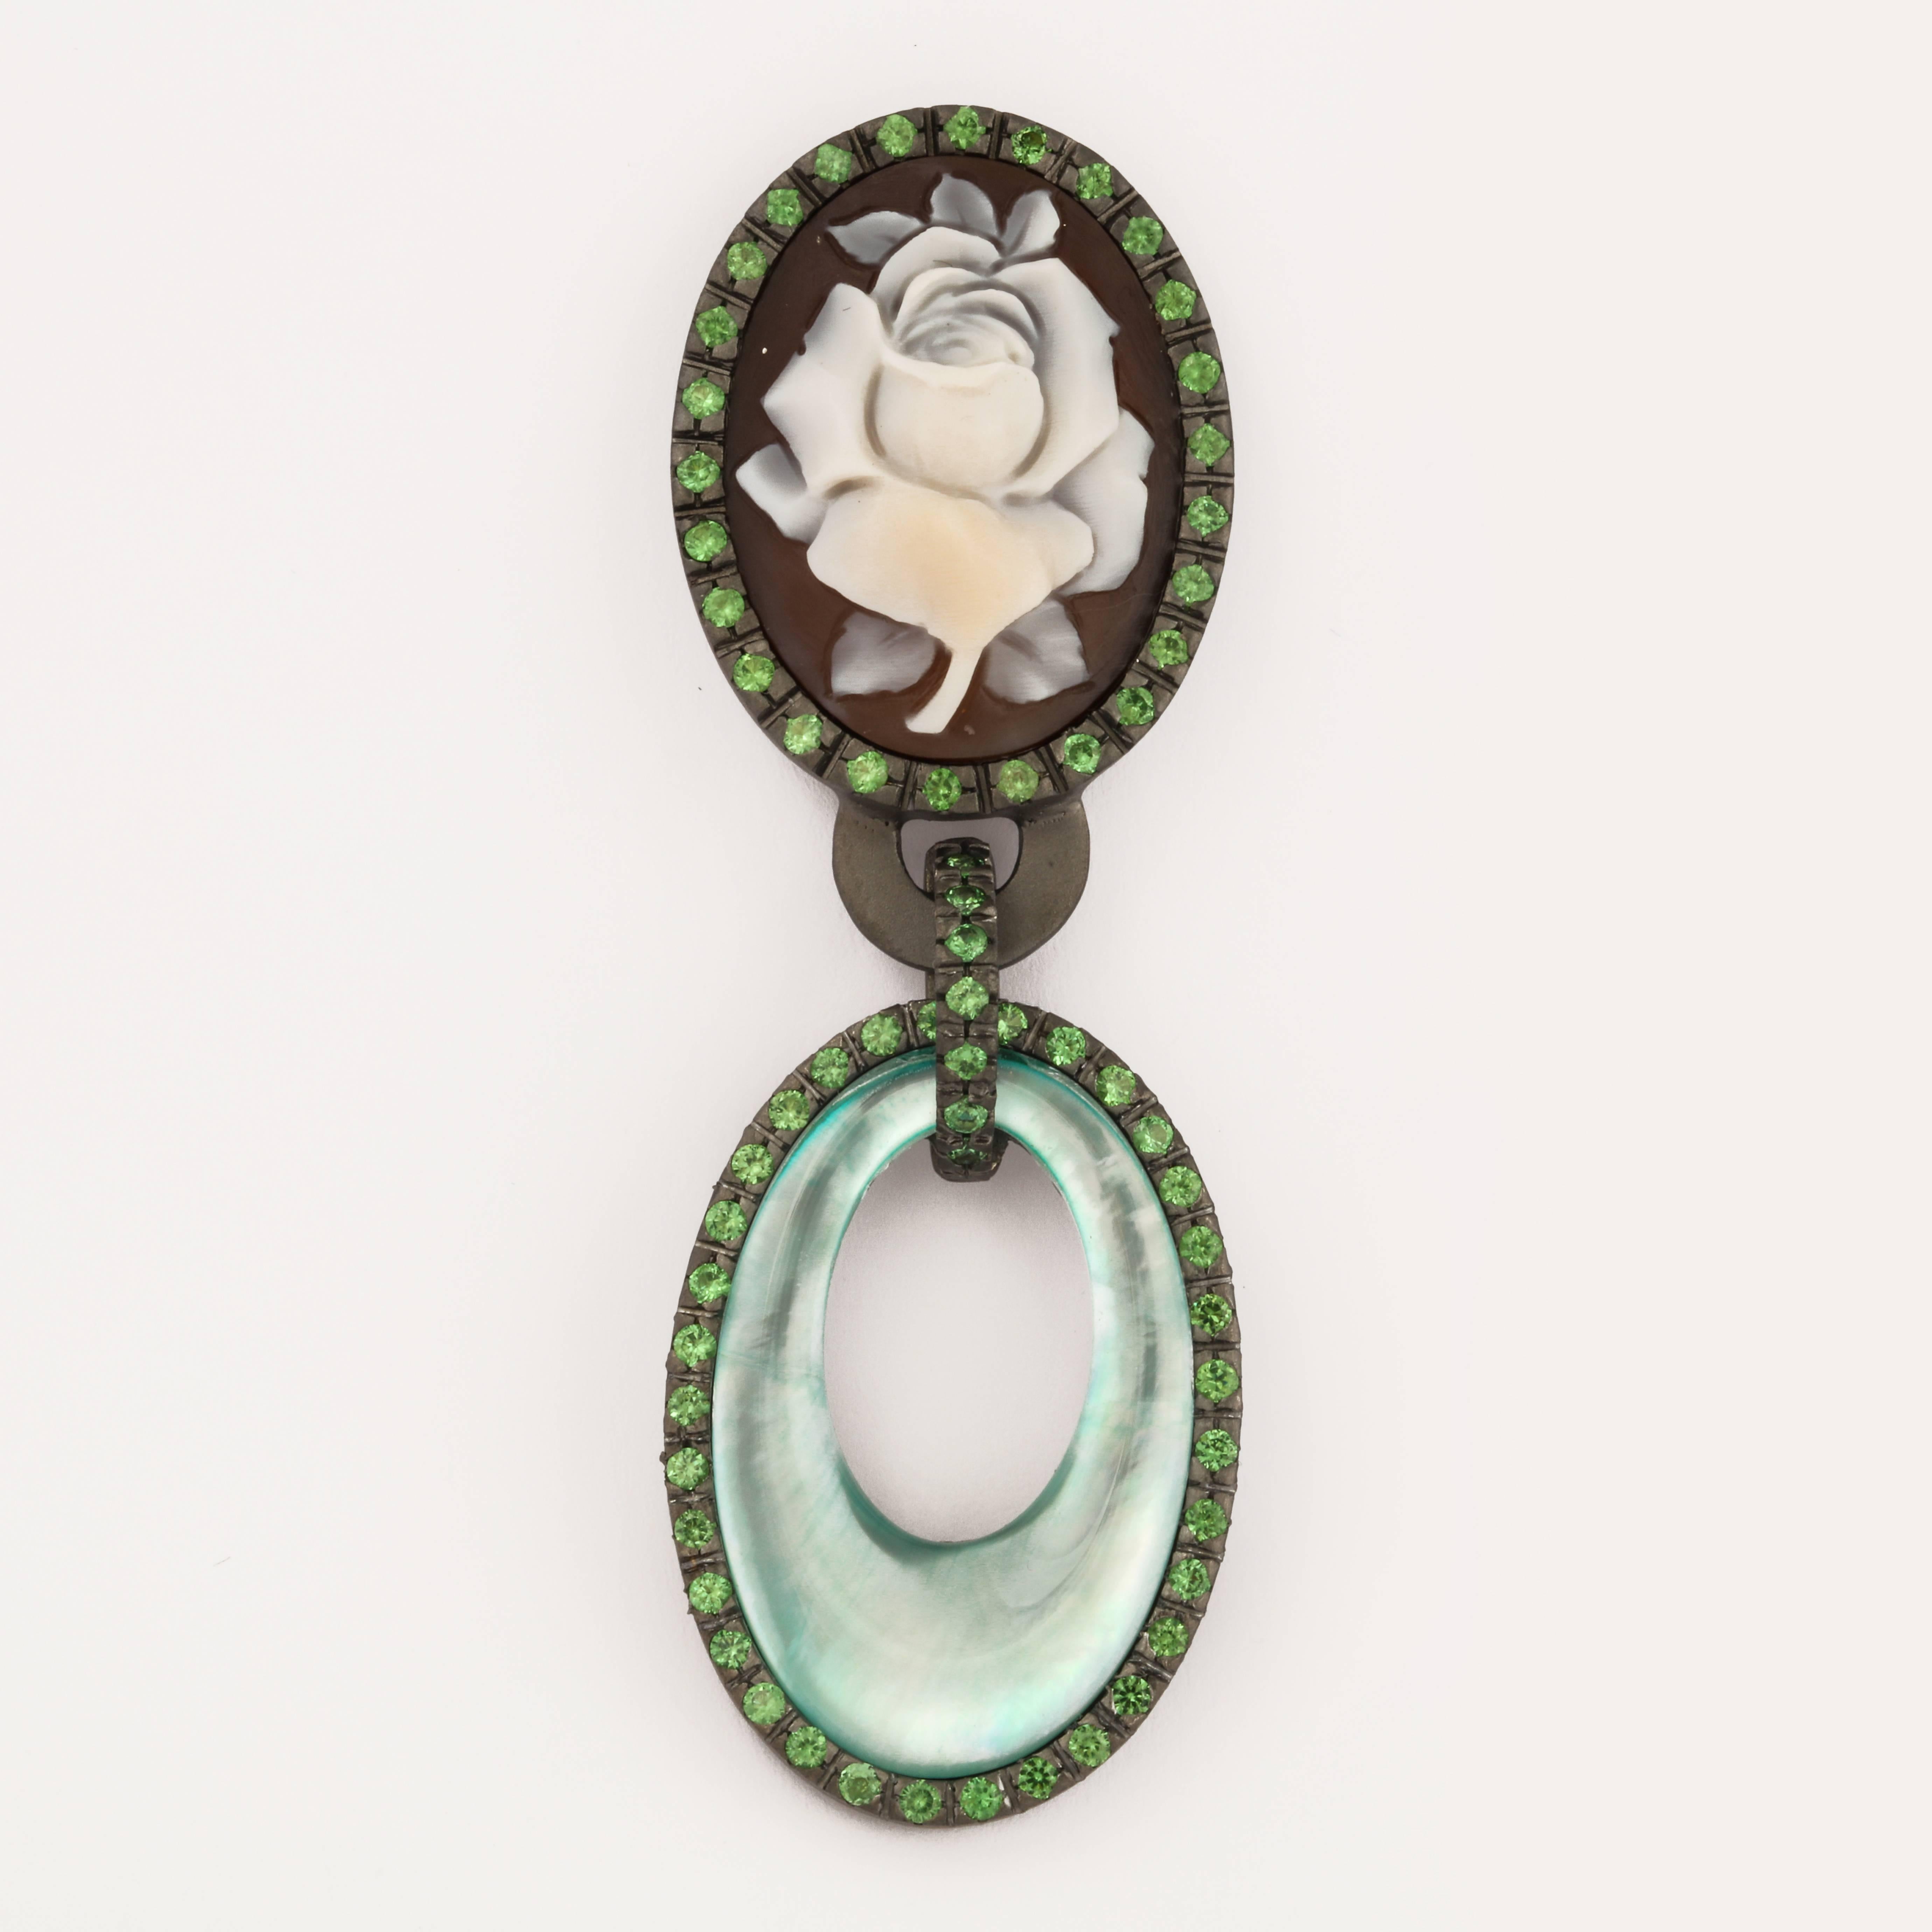 25mm sardonyx cameos hand-carved, set in sterling silver black rhodium plated, with green quartz and tsavorites.